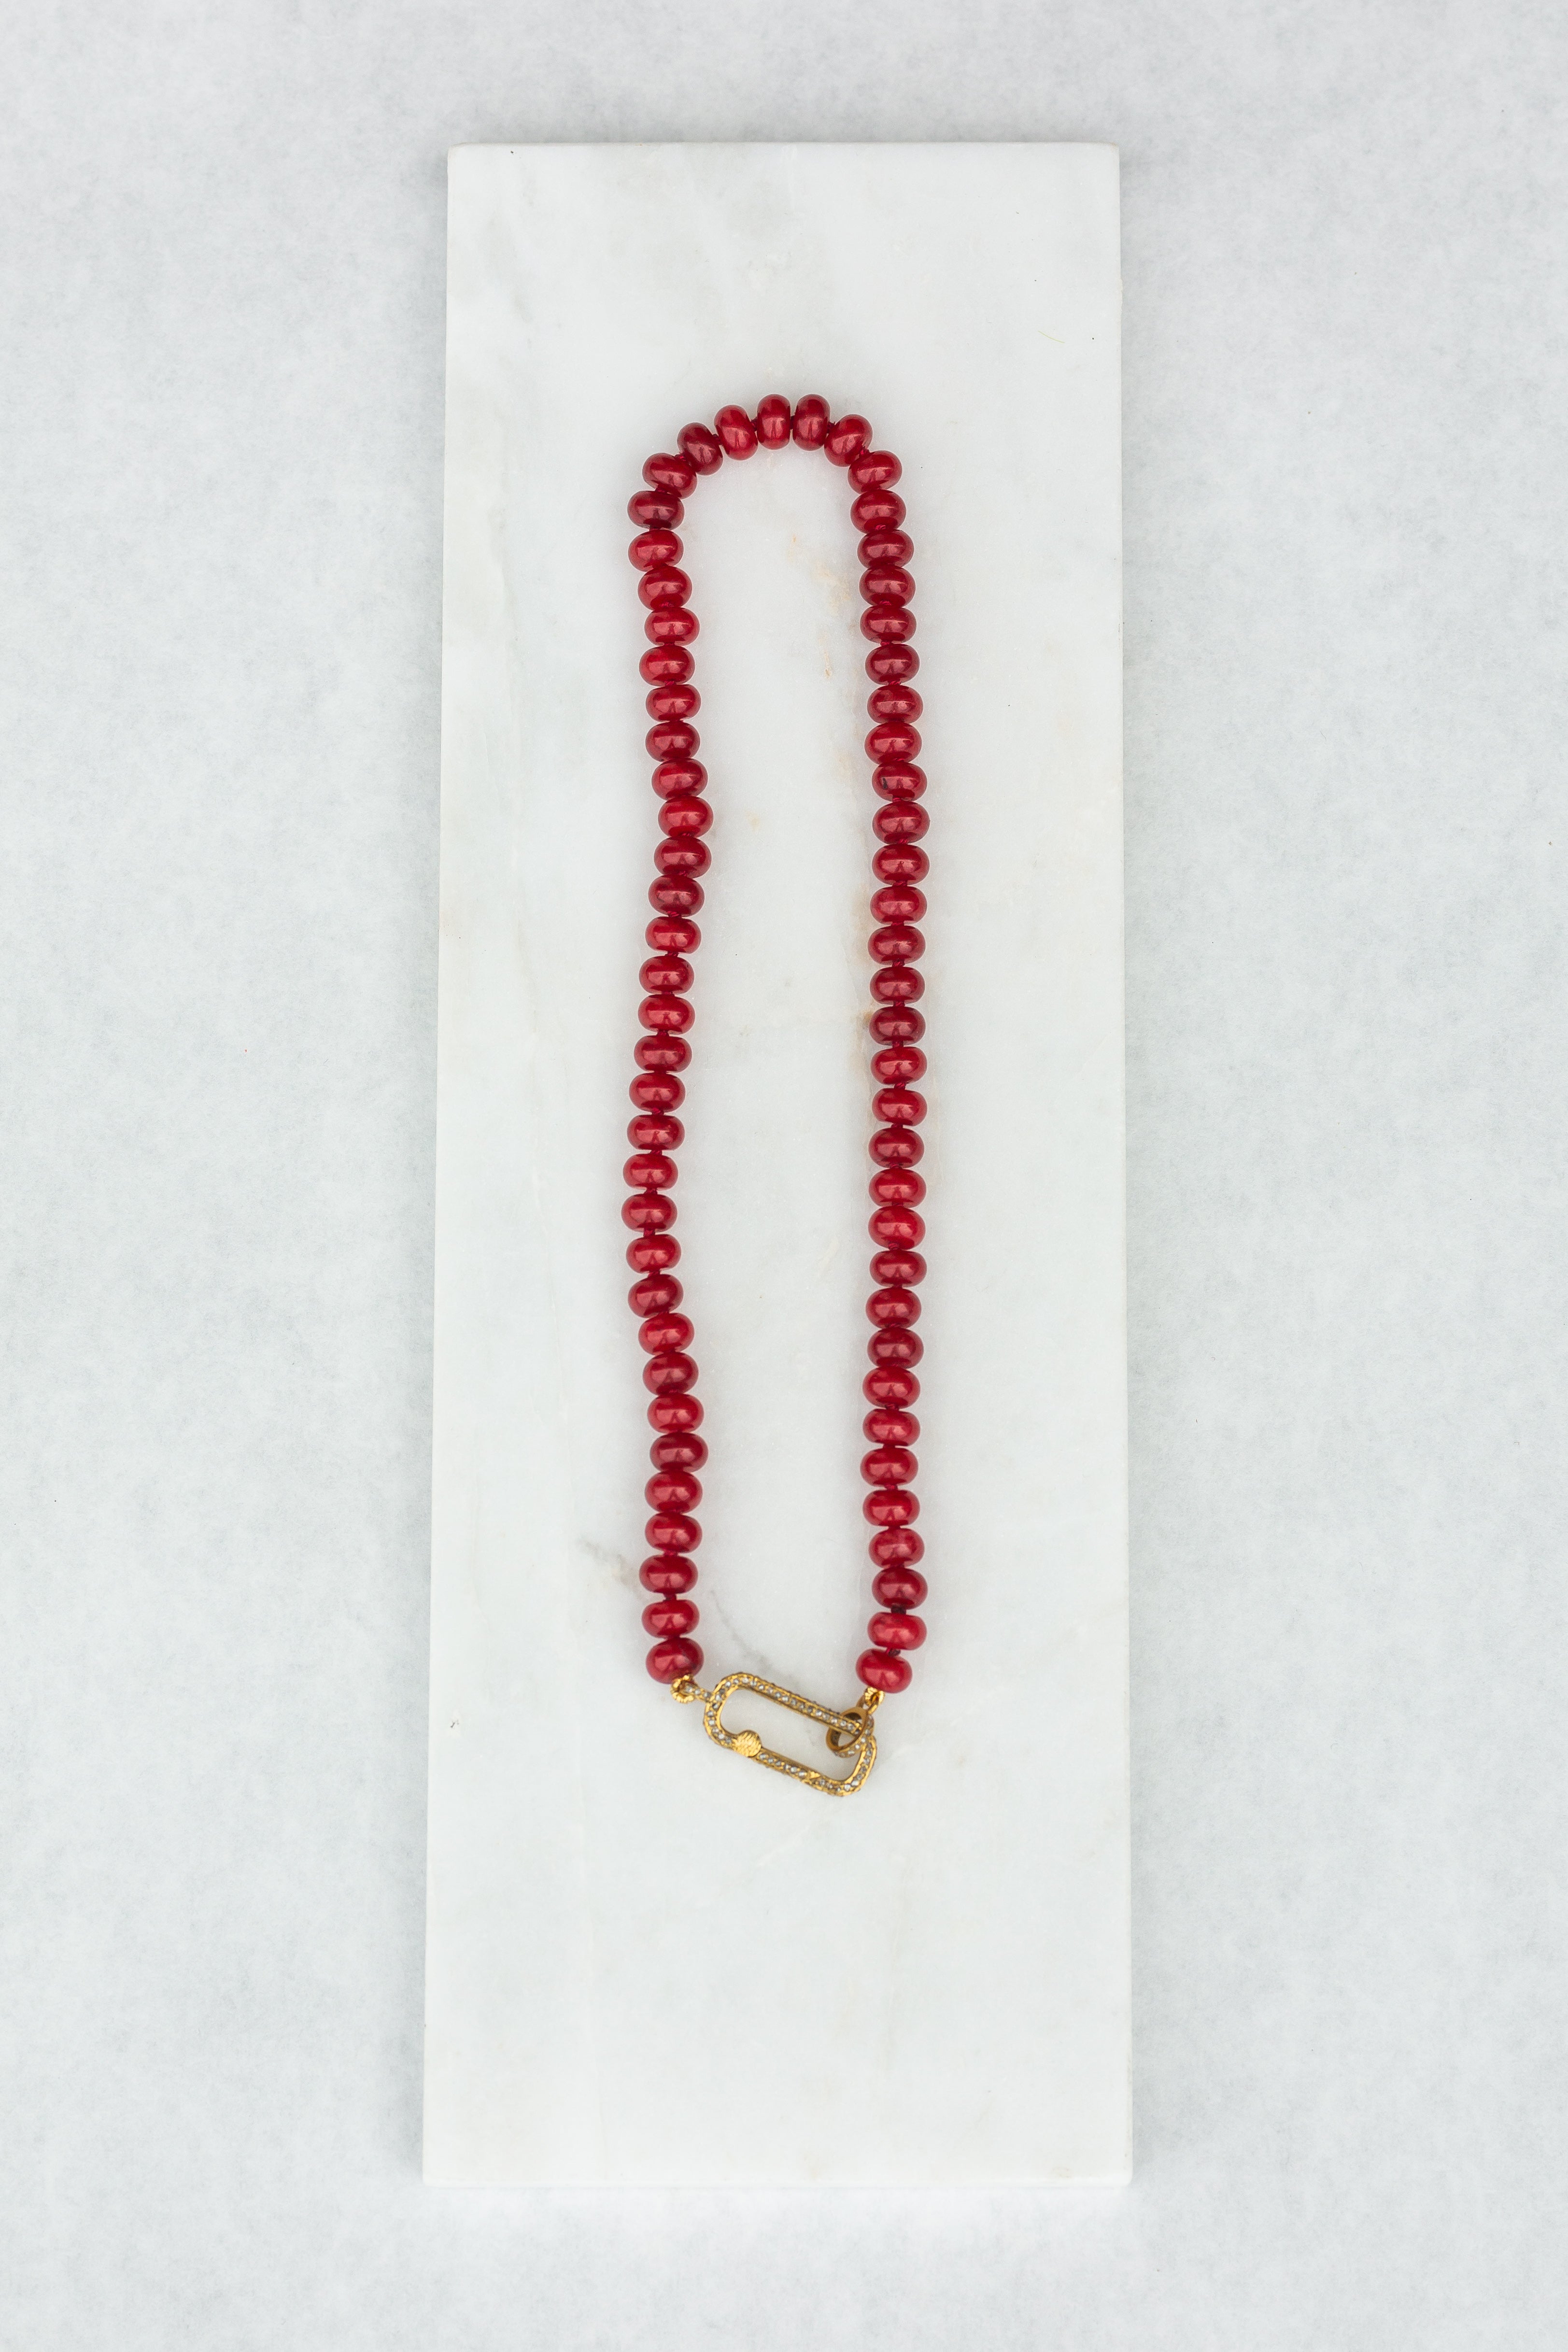 17" Beaded Necklace - Red